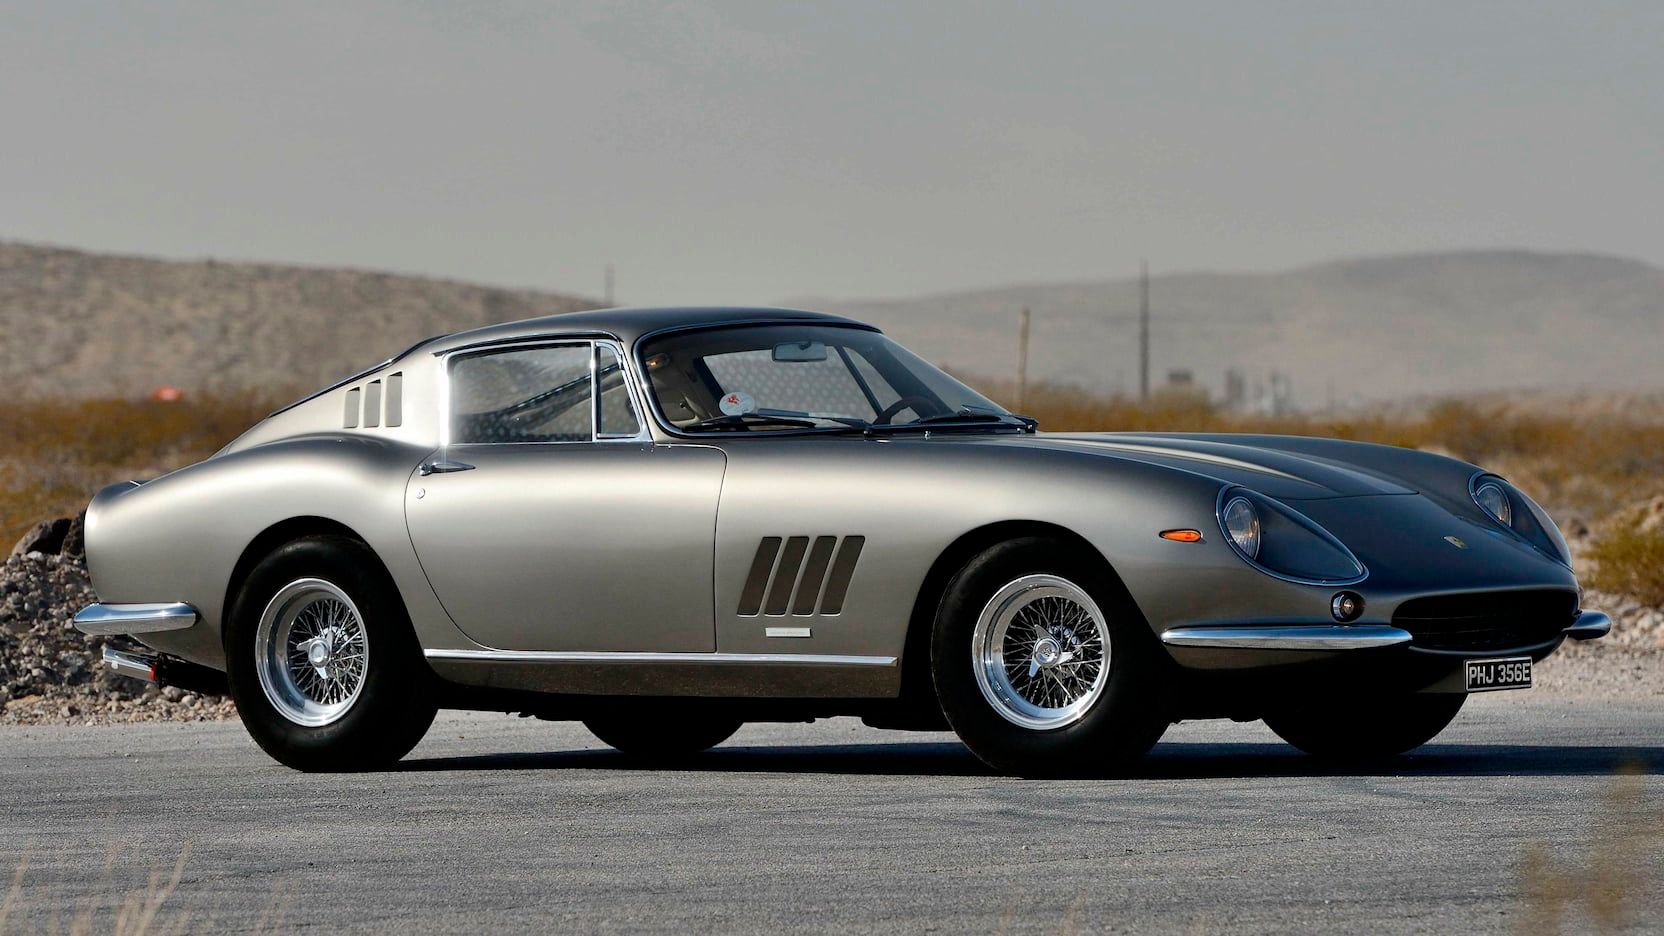 Ferrari 275 GTB/4 Auction Front Quarter View From Right Side